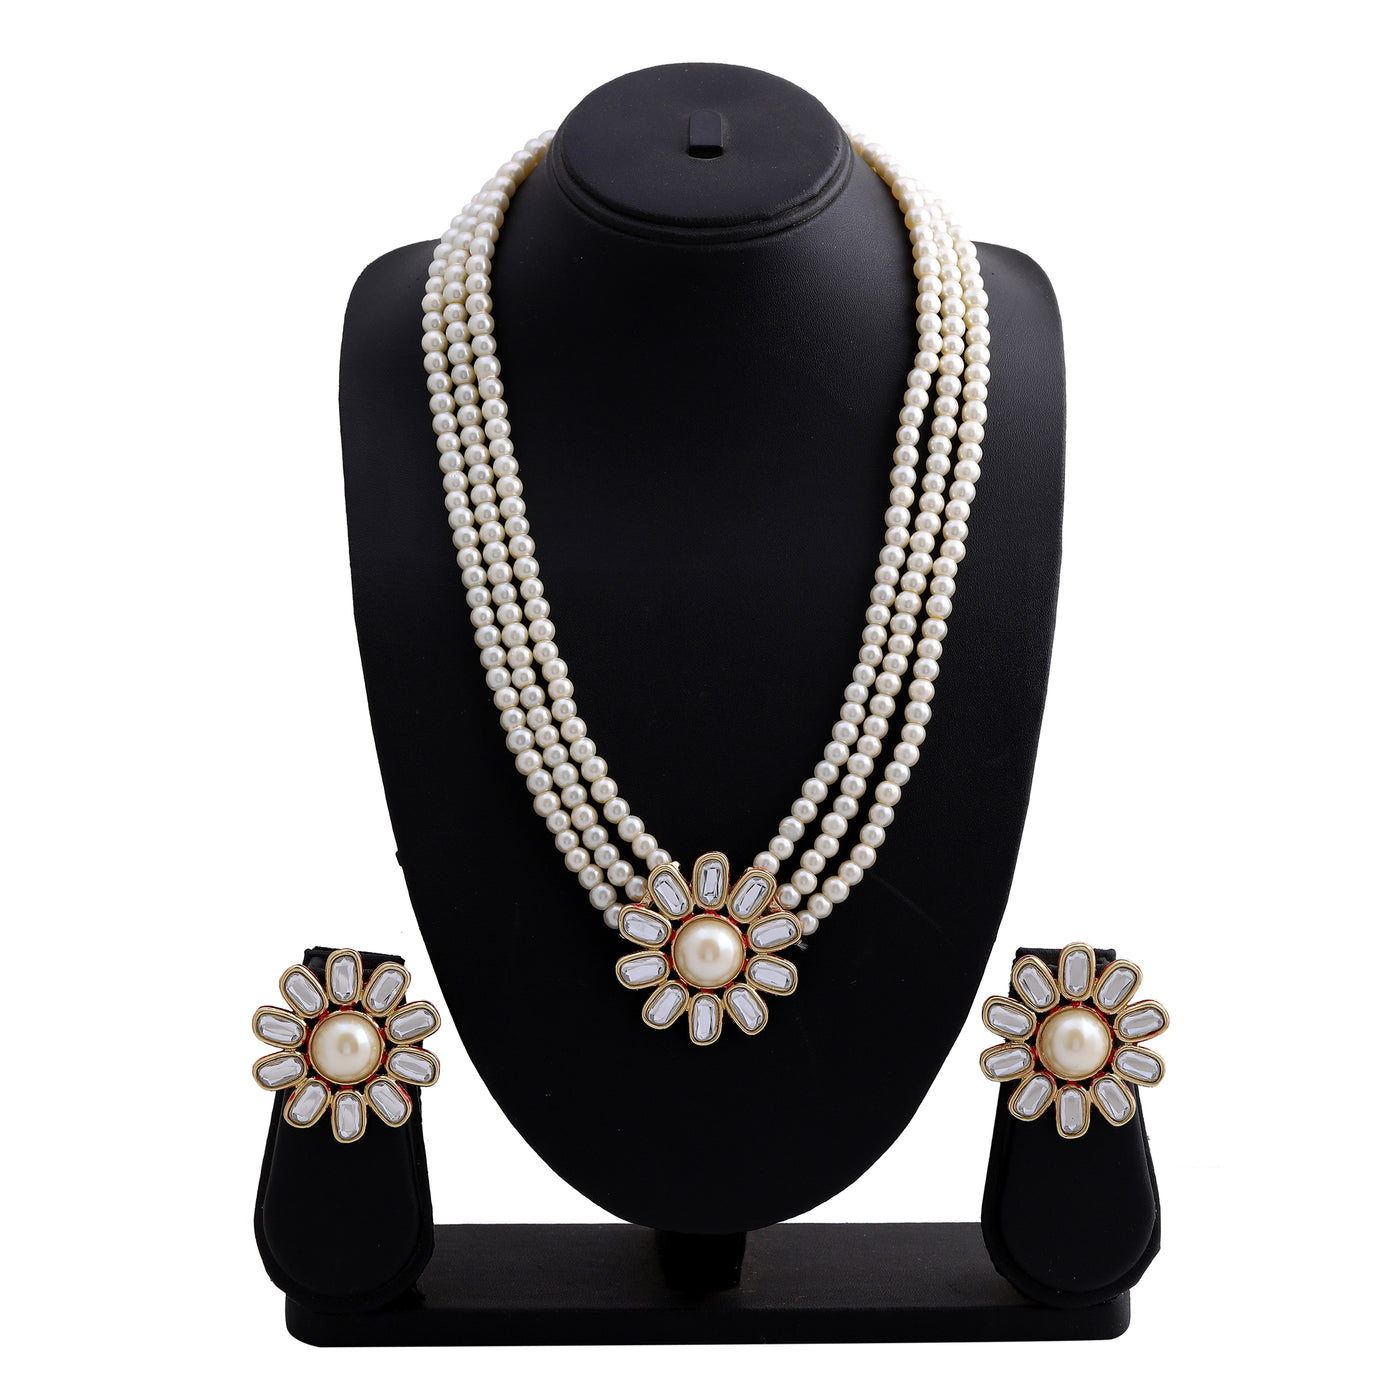 Polki Collection Neutral Designer Pearl Jewelry Necklace